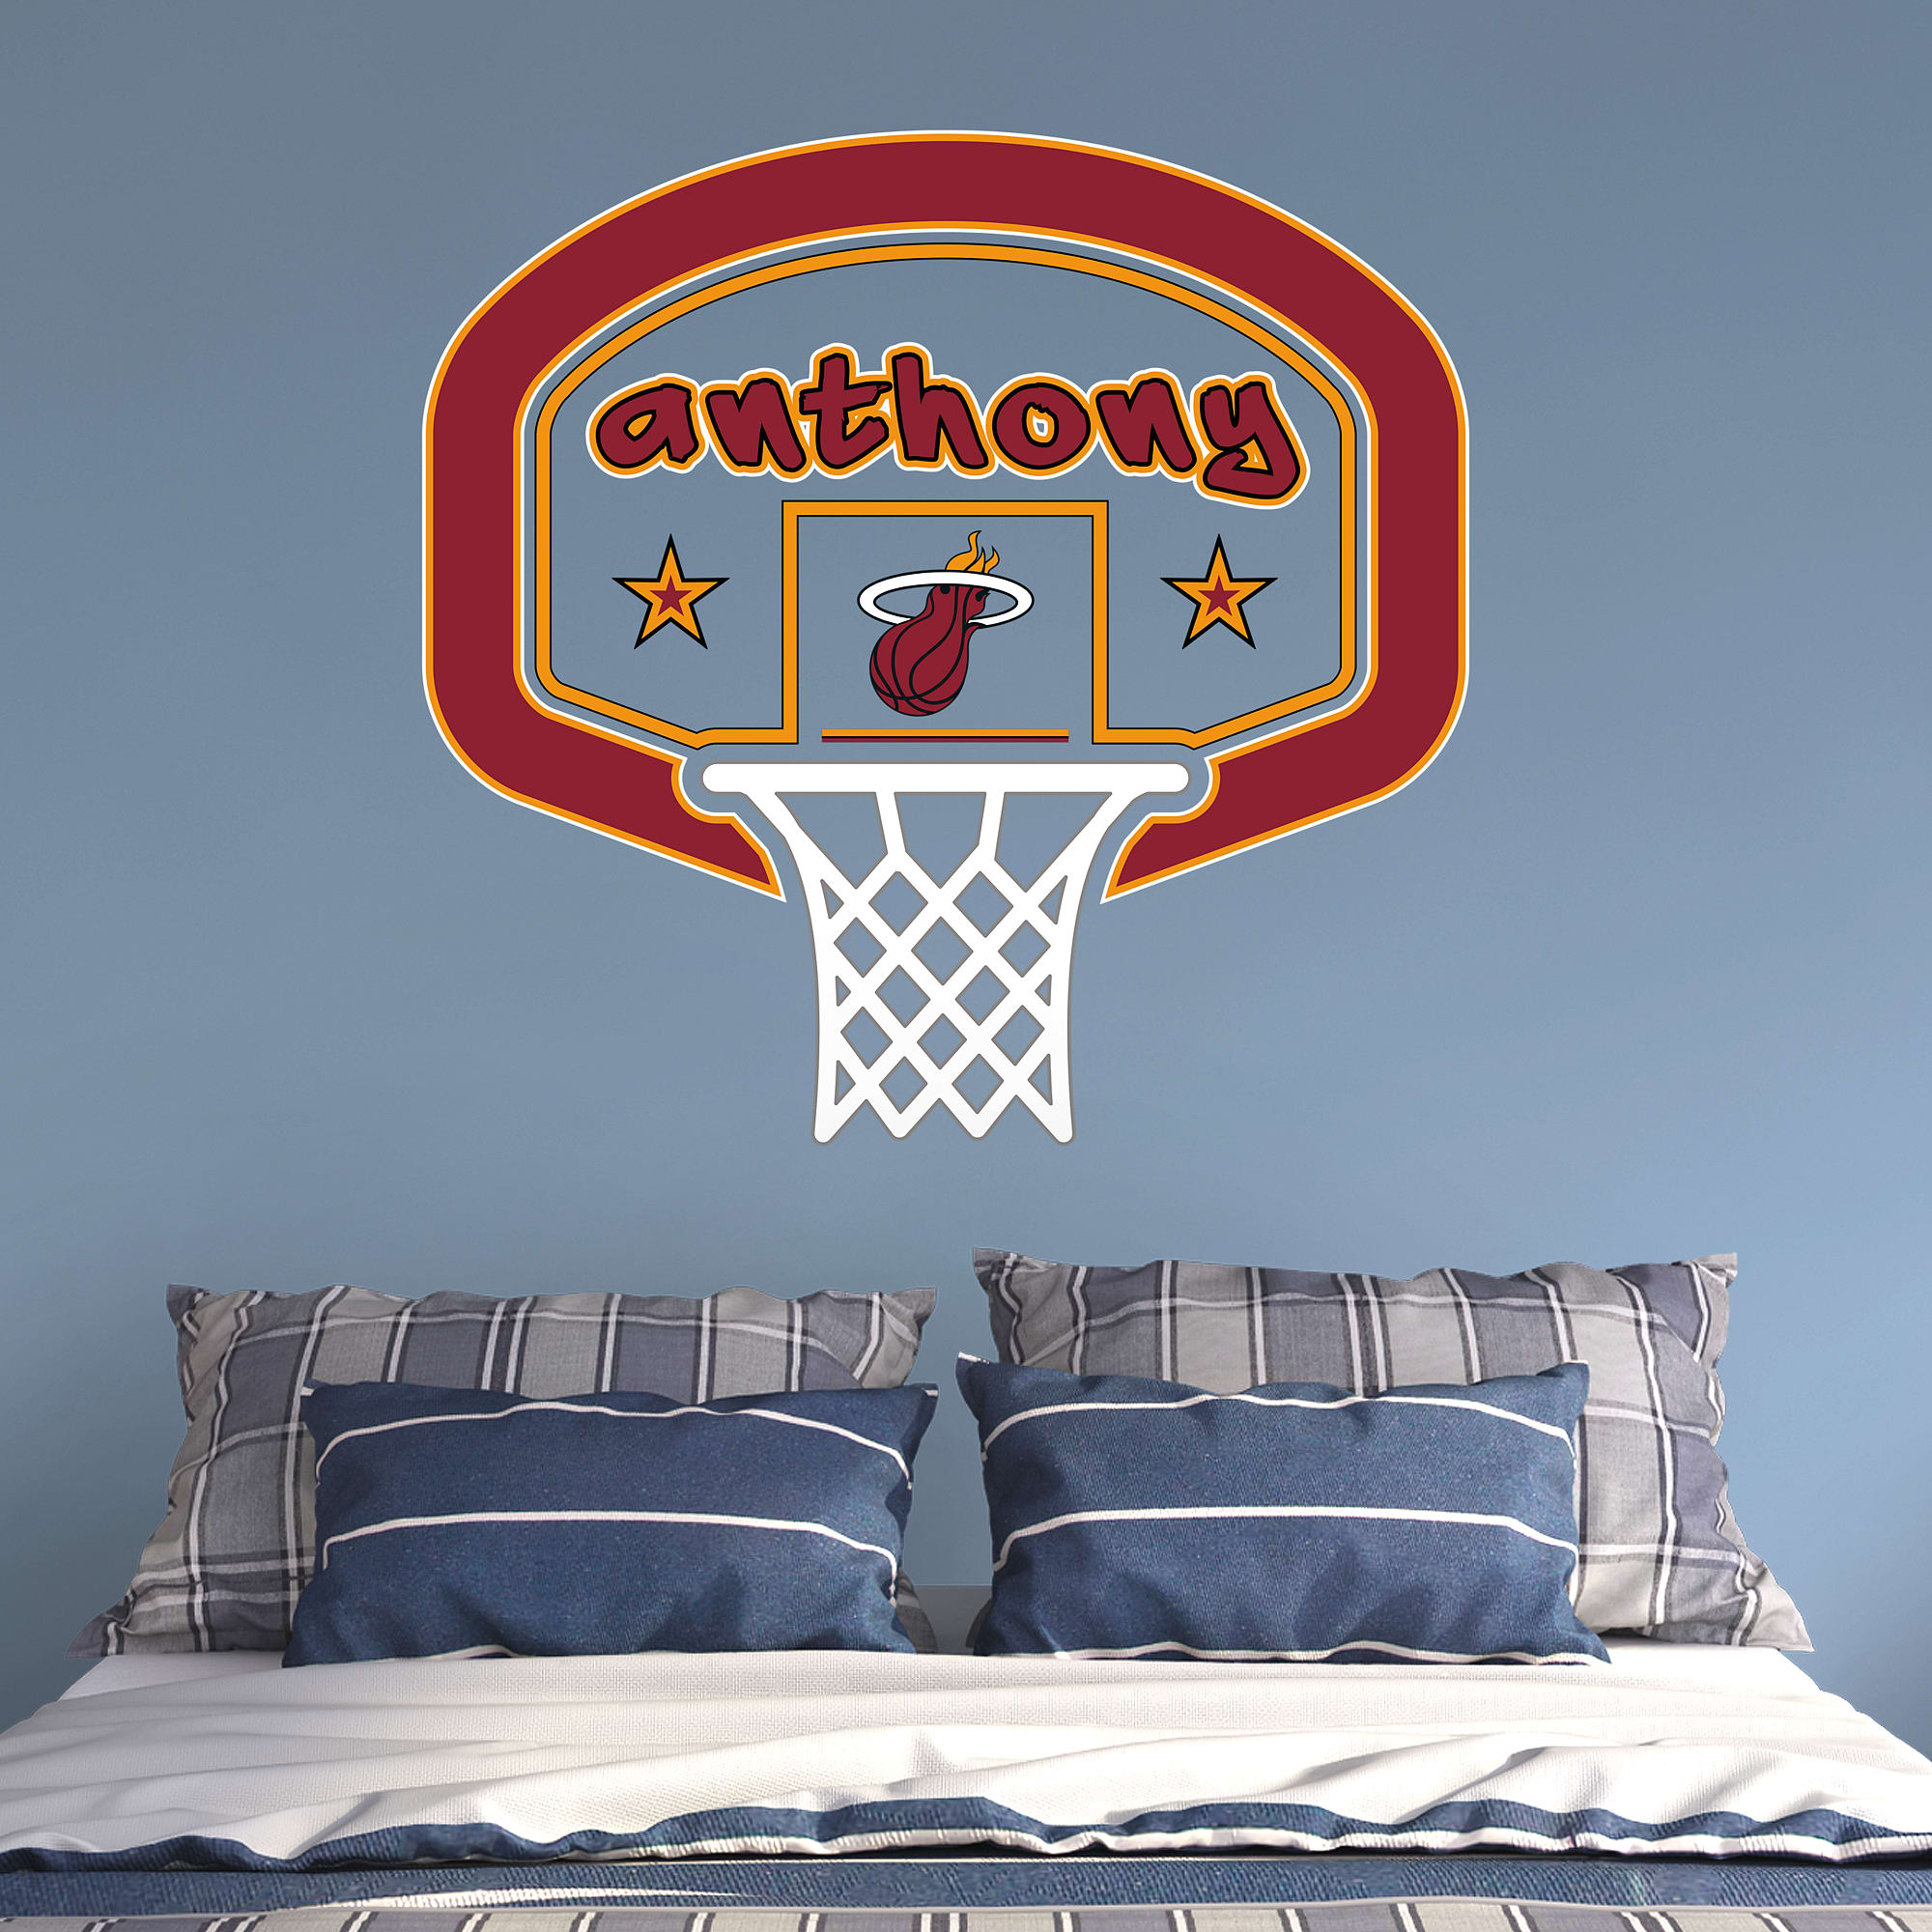 Miami Heat: Personalized Name - Officially Licensed NBA Transfer Decal 52.0"W x 39.5"H by Fathead | Vinyl